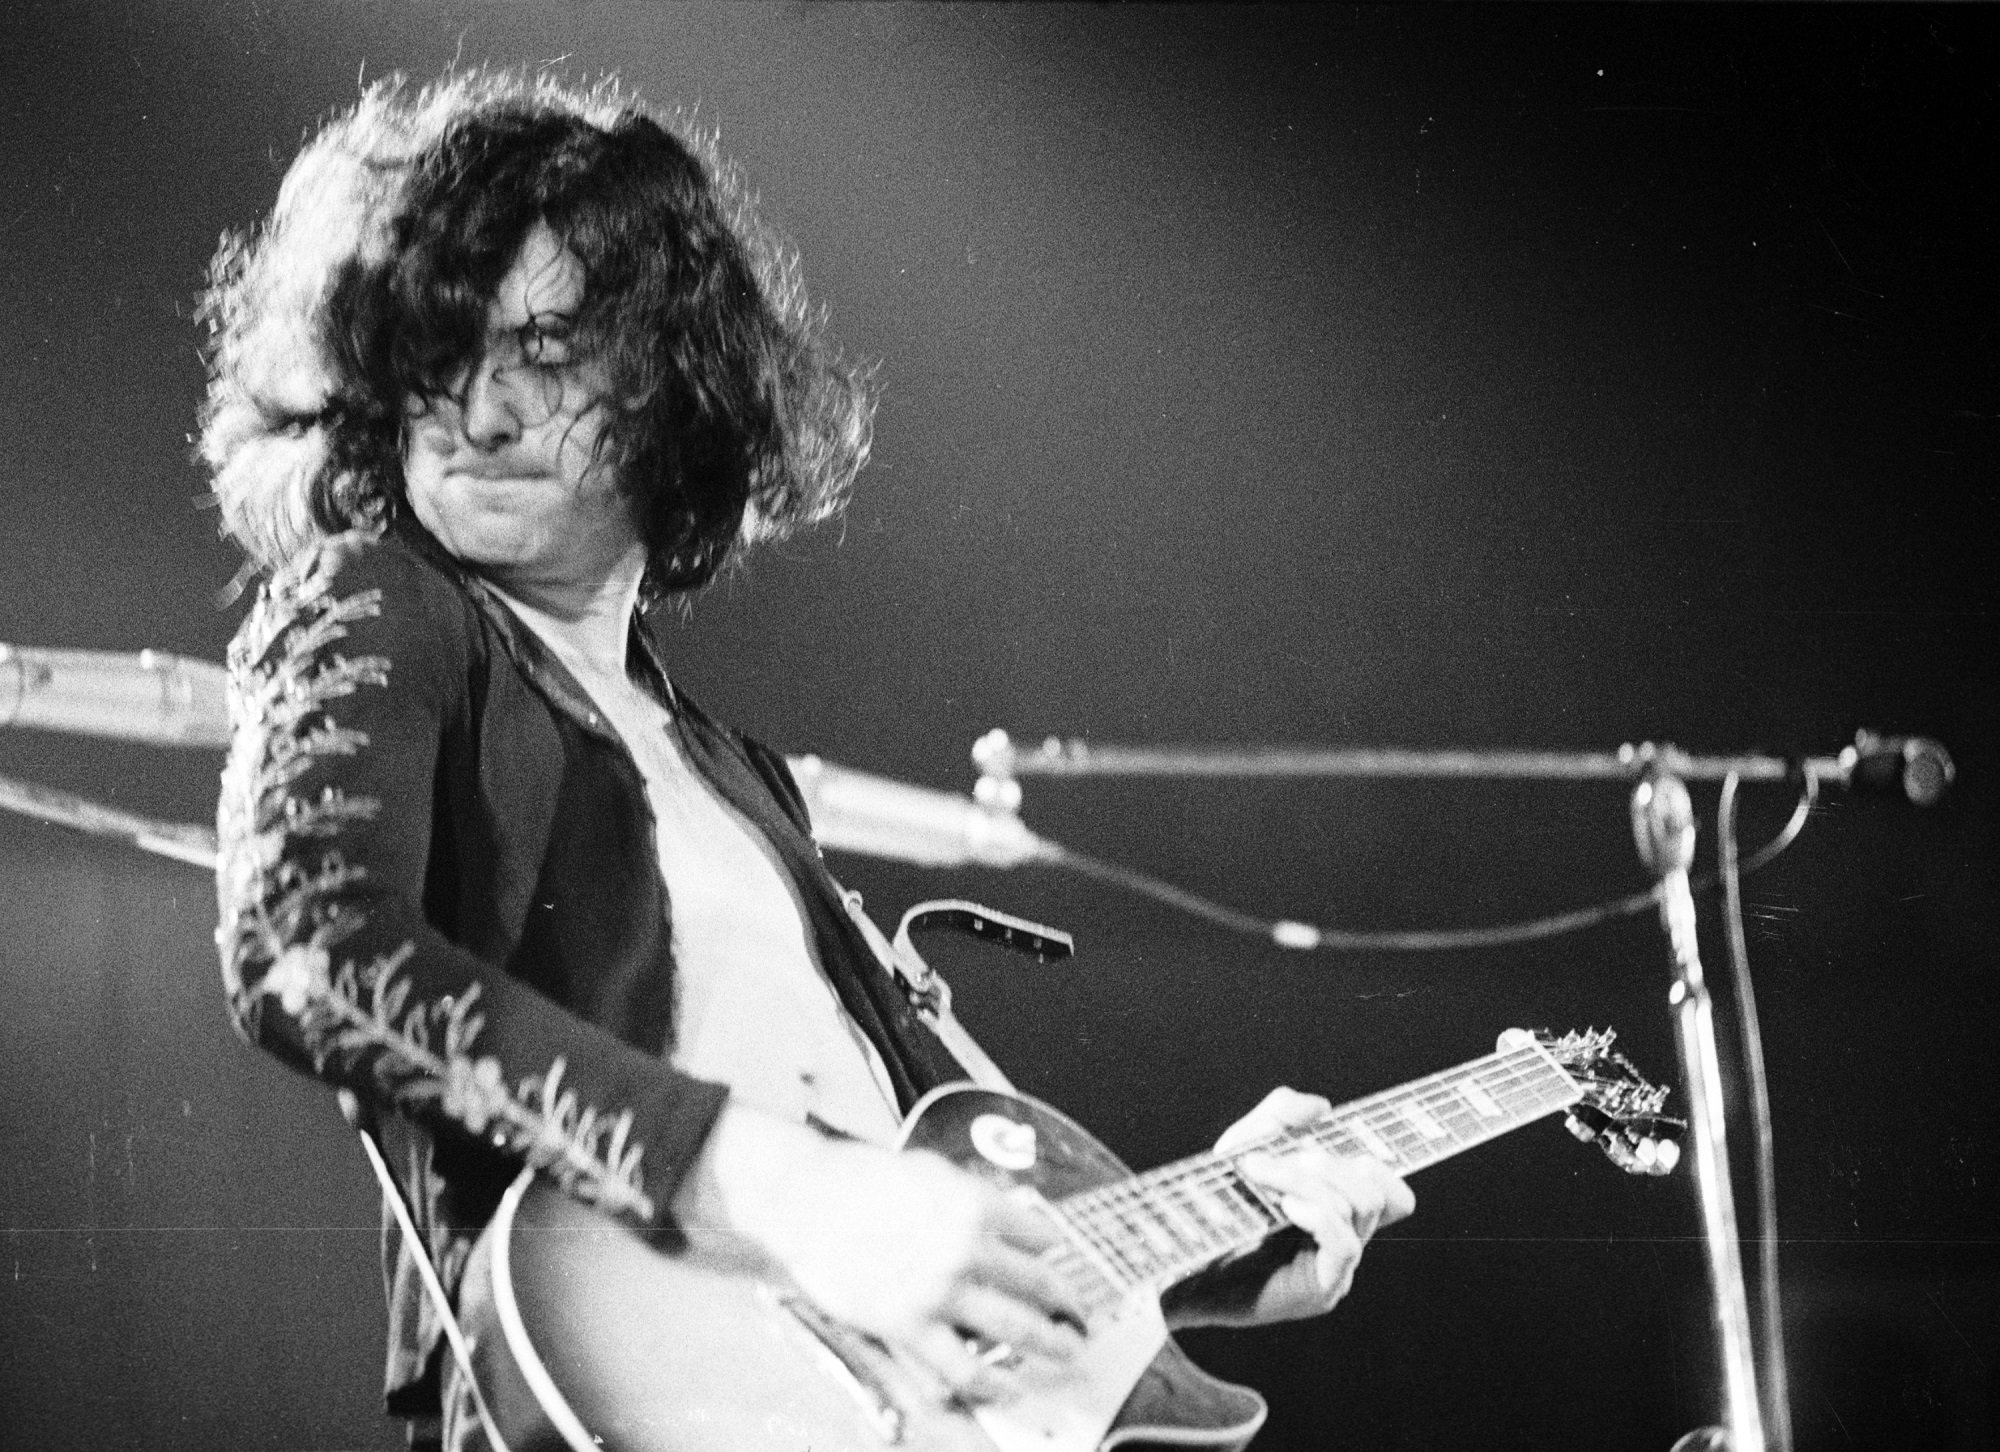 A black-and-white-photo of Jimmy Page playing guitar